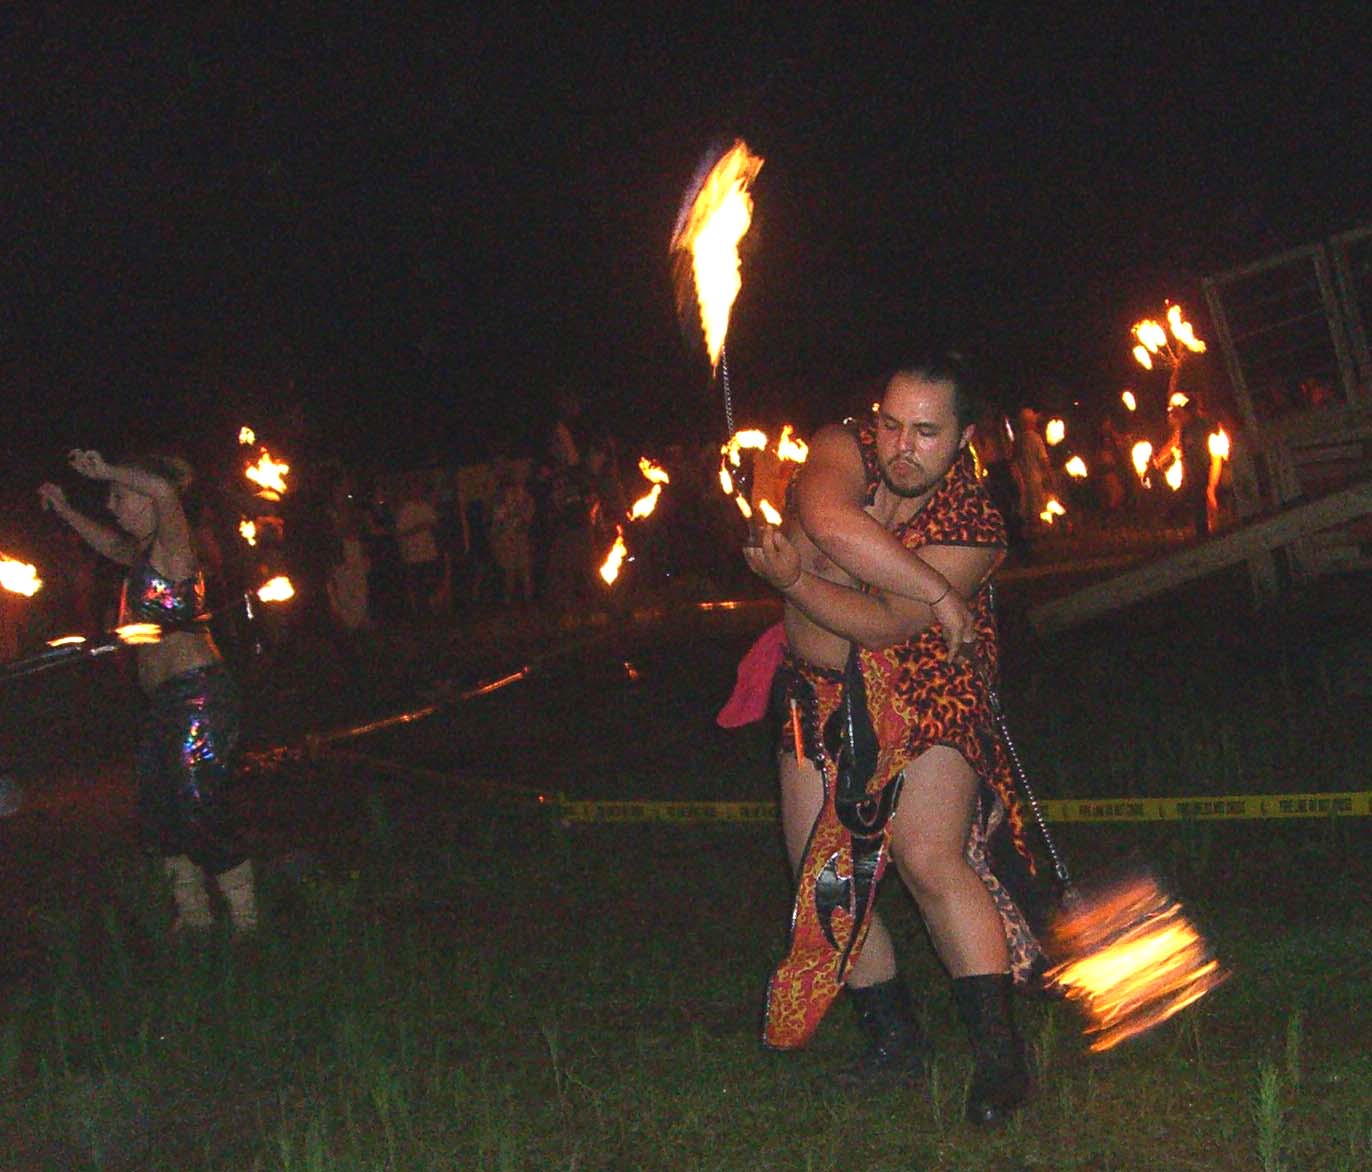 A fire spinner named Warlock performs at Burning Flipside 2007